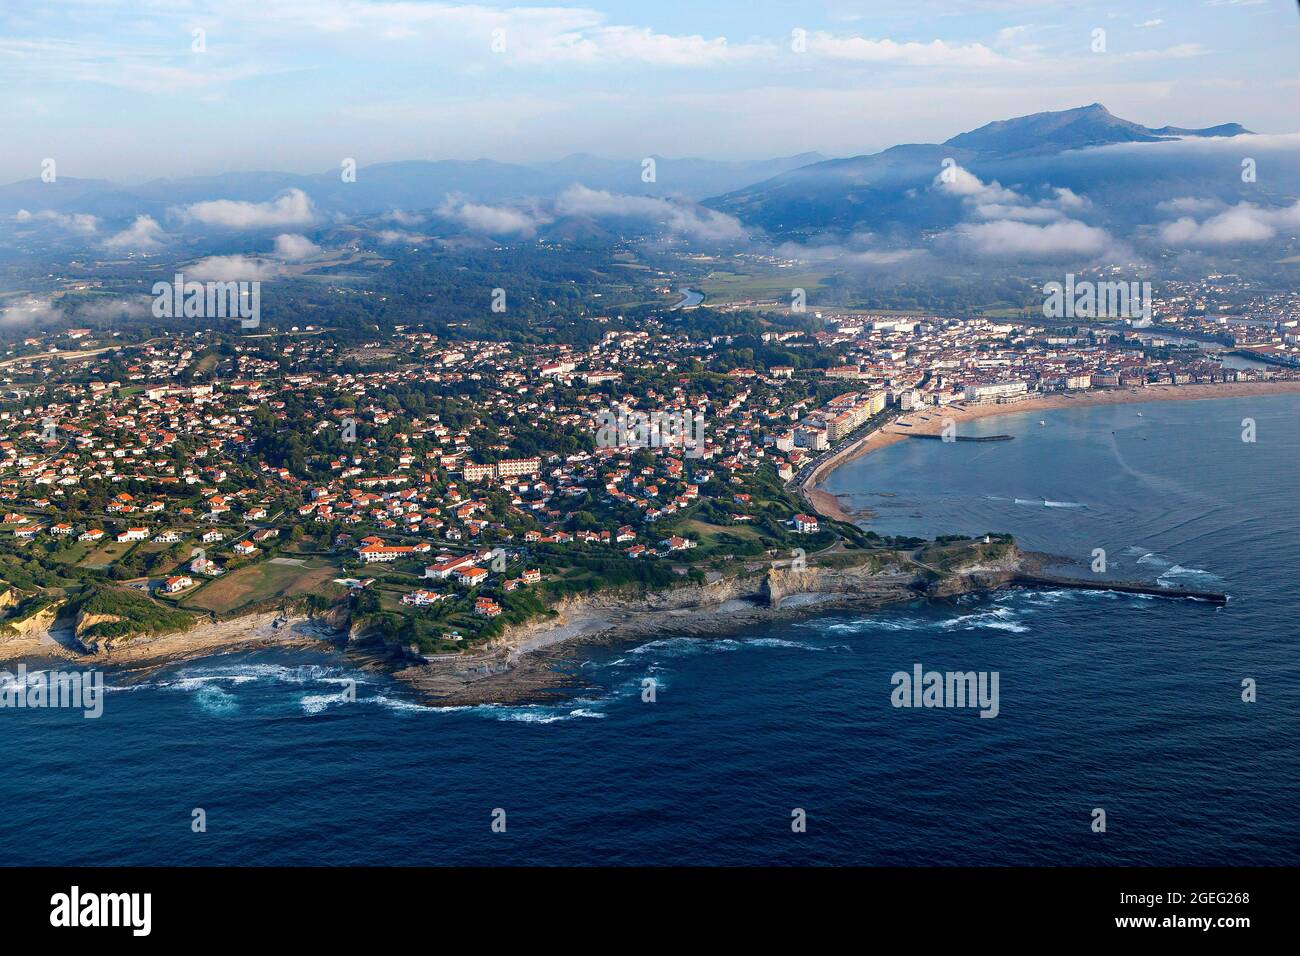 Saint Jean de Luz (south western France): aerial view of the Basque coast with the town, the cliffs, the beach and mountains in the distance Stock Photo